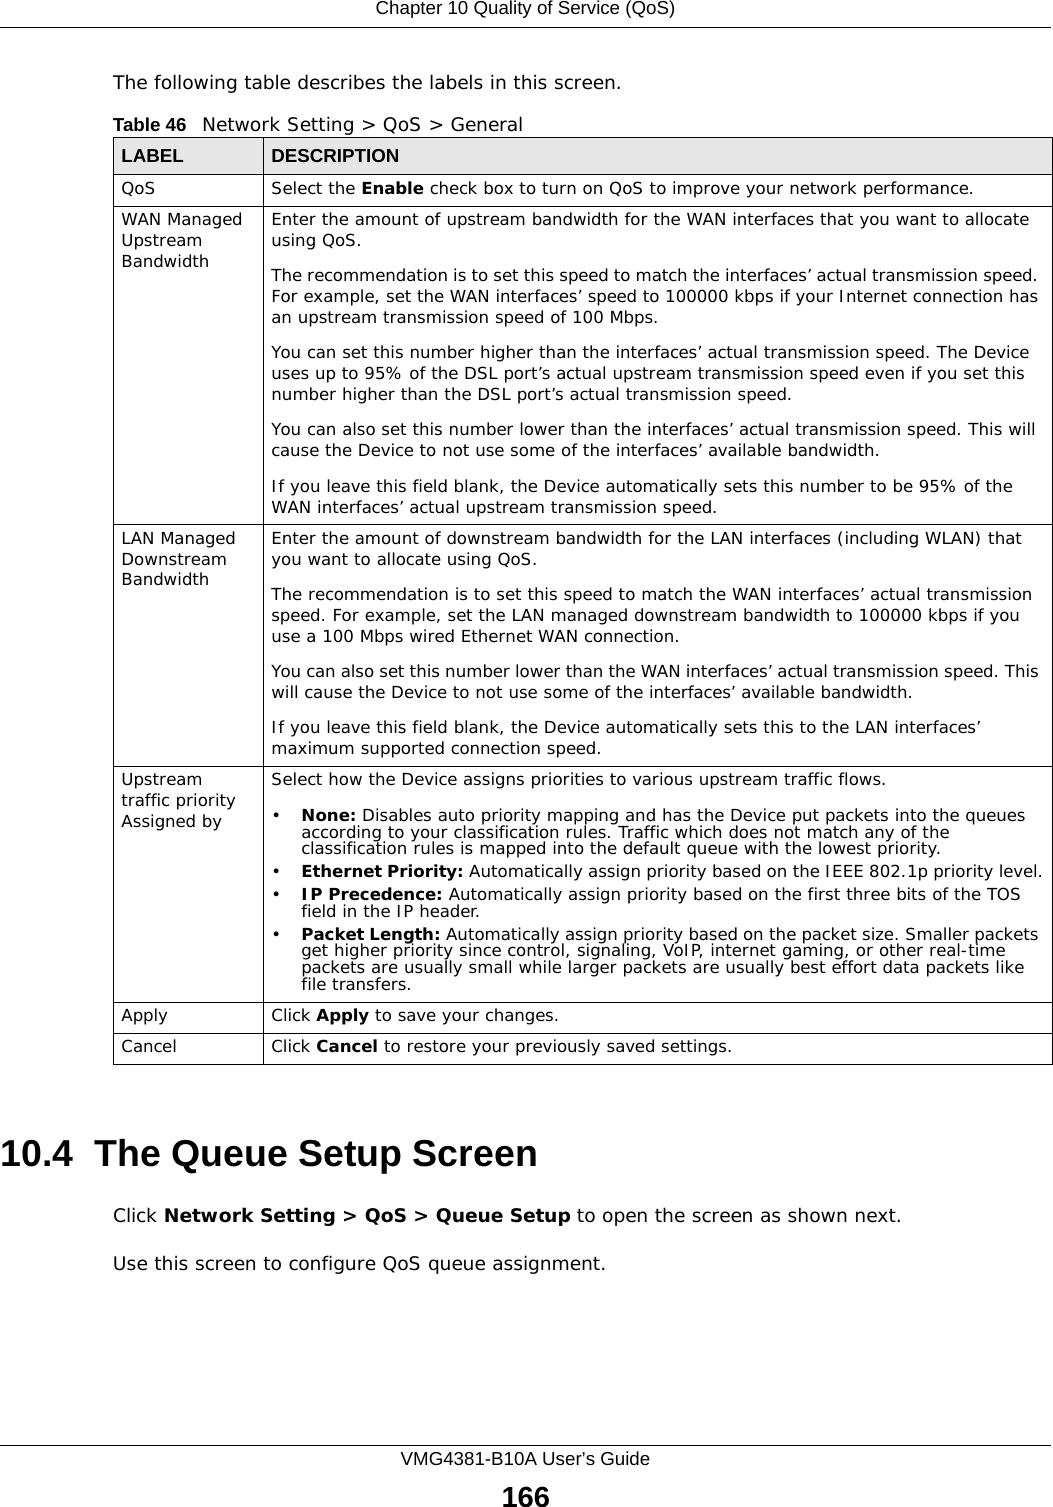 Chapter 10 Quality of Service (QoS)VMG4381-B10A User’s Guide166The following table describes the labels in this screen. 10.4  The Queue Setup ScreenClick Network Setting &gt; QoS &gt; Queue Setup to open the screen as shown next. Use this screen to configure QoS queue assignment. Table 46   Network Setting &gt; QoS &gt; GeneralLABEL DESCRIPTIONQoS Select the Enable check box to turn on QoS to improve your network performance. WAN Managed Upstream Bandwidth Enter the amount of upstream bandwidth for the WAN interfaces that you want to allocate using QoS. The recommendation is to set this speed to match the interfaces’ actual transmission speed. For example, set the WAN interfaces’ speed to 100000 kbps if your Internet connection has an upstream transmission speed of 100 Mbps.        You can set this number higher than the interfaces’ actual transmission speed. The Device uses up to 95% of the DSL port’s actual upstream transmission speed even if you set this number higher than the DSL port’s actual transmission speed.You can also set this number lower than the interfaces’ actual transmission speed. This will cause the Device to not use some of the interfaces’ available bandwidth.If you leave this field blank, the Device automatically sets this number to be 95% of the WAN interfaces’ actual upstream transmission speed.LAN Managed Downstream Bandwidth Enter the amount of downstream bandwidth for the LAN interfaces (including WLAN) that you want to allocate using QoS. The recommendation is to set this speed to match the WAN interfaces’ actual transmission speed. For example, set the LAN managed downstream bandwidth to 100000 kbps if you use a 100 Mbps wired Ethernet WAN connection.        You can also set this number lower than the WAN interfaces’ actual transmission speed. This will cause the Device to not use some of the interfaces’ available bandwidth.If you leave this field blank, the Device automatically sets this to the LAN interfaces’ maximum supported connection speed.Upstream traffic priority Assigned bySelect how the Device assigns priorities to various upstream traffic flows.•None: Disables auto priority mapping and has the Device put packets into the queues according to your classification rules. Traffic which does not match any of the classification rules is mapped into the default queue with the lowest priority.•Ethernet Priority: Automatically assign priority based on the IEEE 802.1p priority level.•IP Precedence: Automatically assign priority based on the first three bits of the TOS field in the IP header.•Packet Length: Automatically assign priority based on the packet size. Smaller packets get higher priority since control, signaling, VoIP, internet gaming, or other real-time packets are usually small while larger packets are usually best effort data packets like file transfers.Apply Click Apply to save your changes.Cancel Click Cancel to restore your previously saved settings.